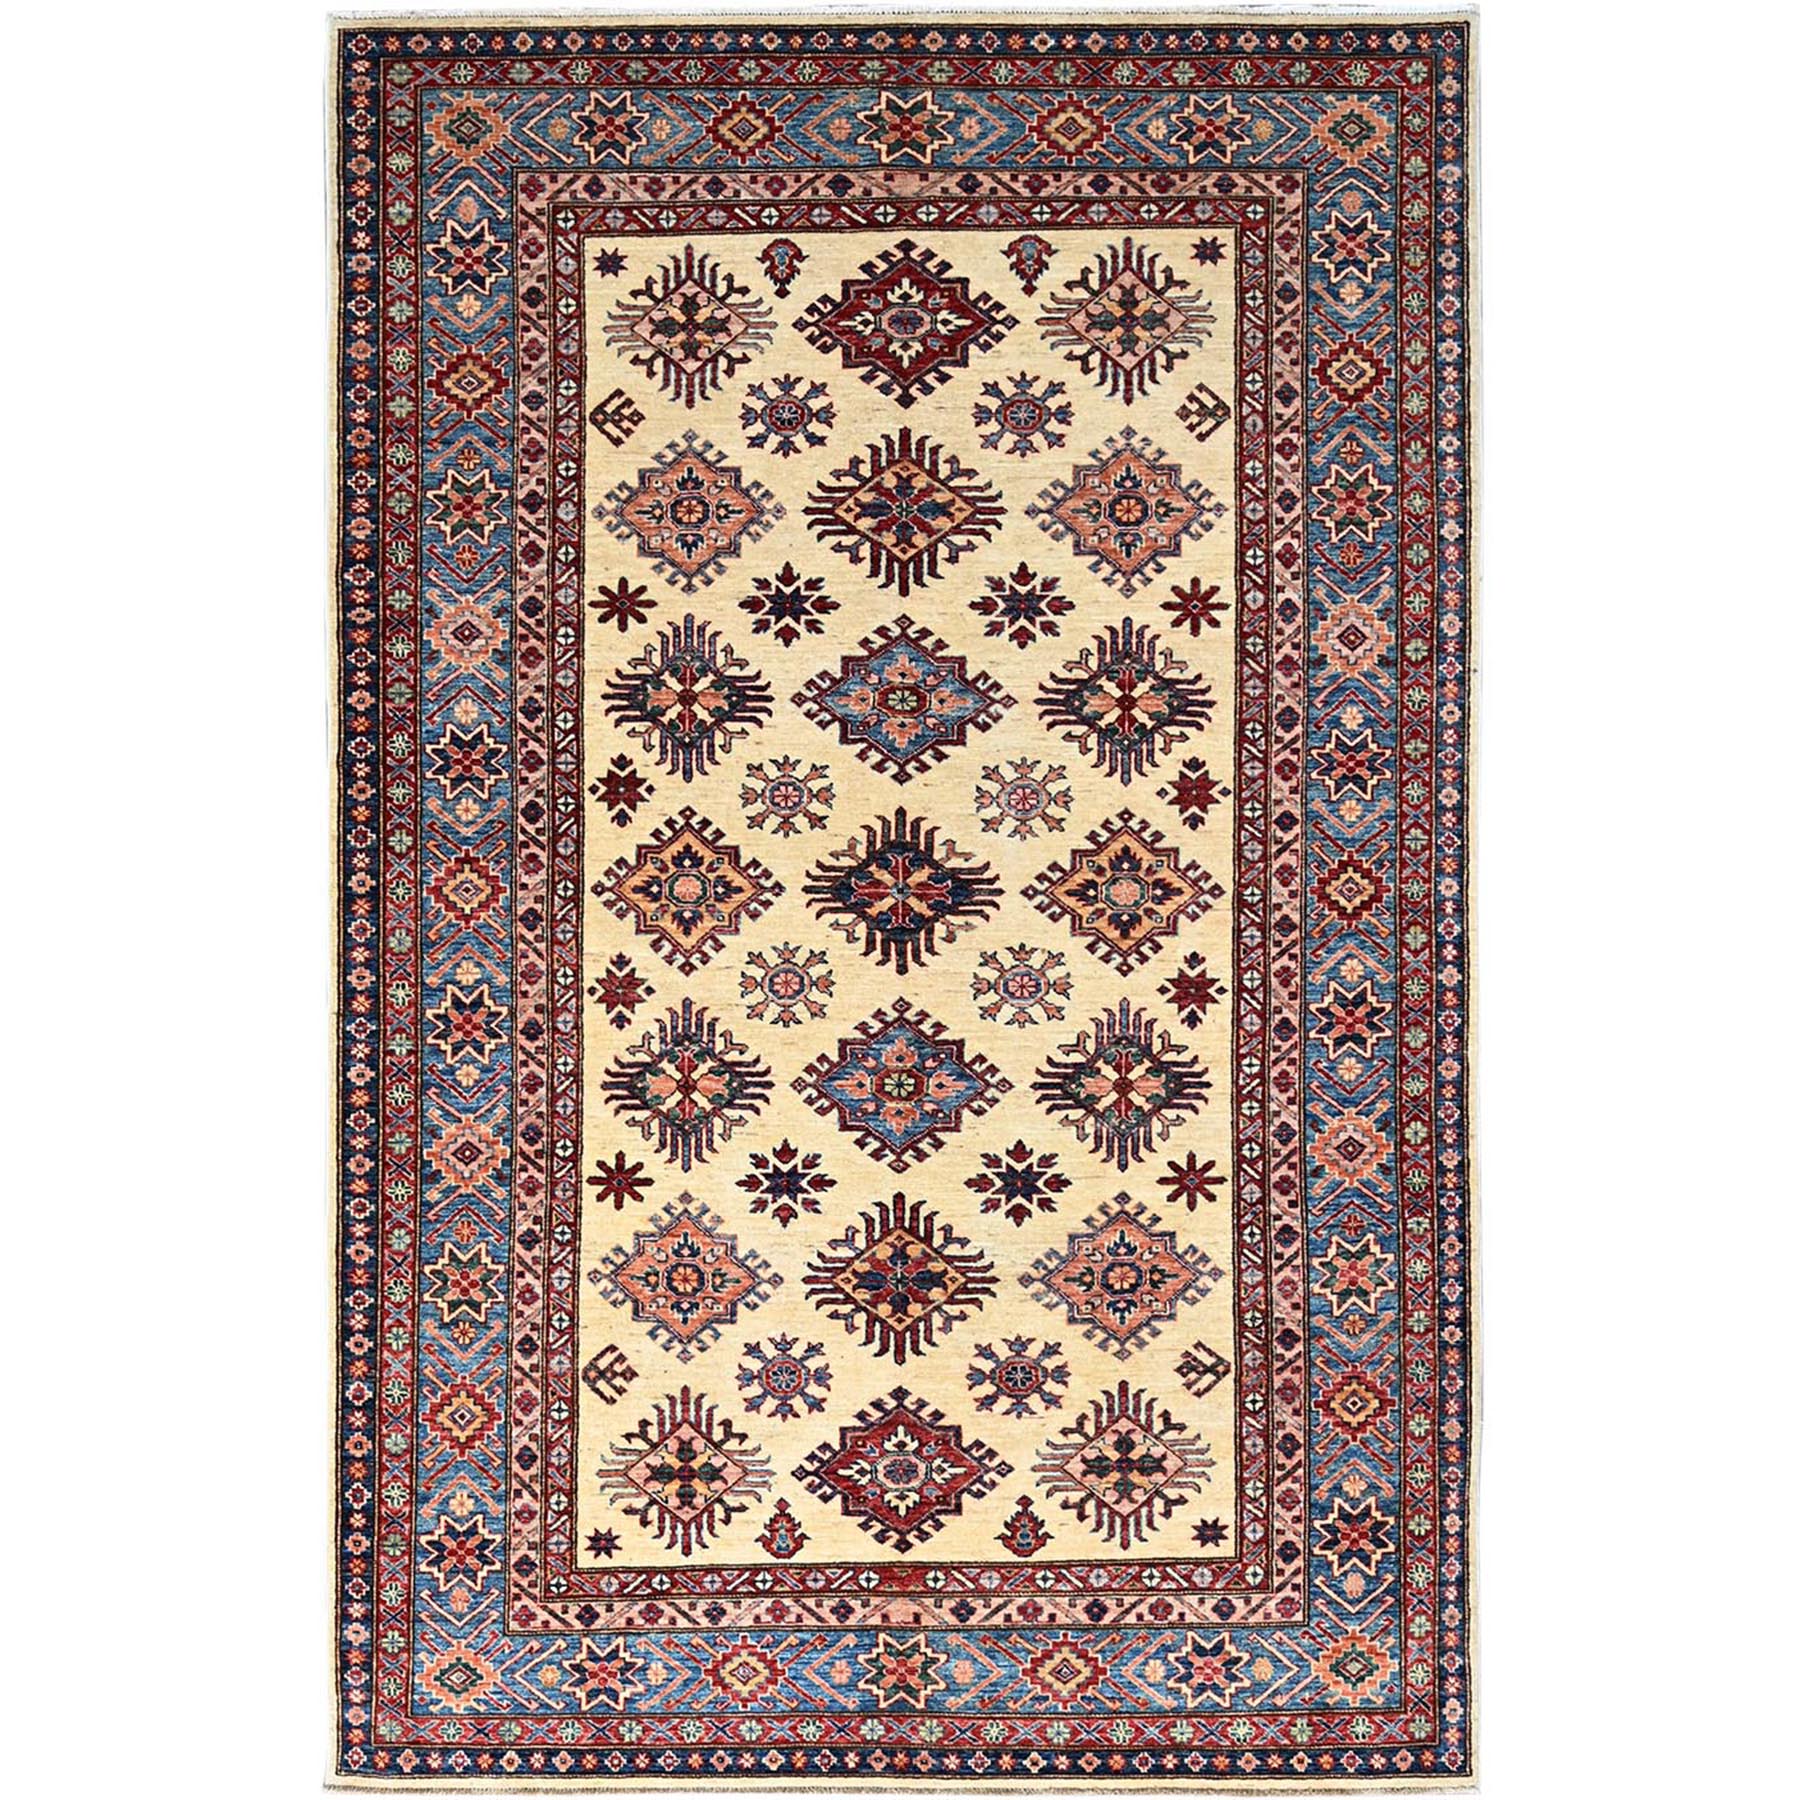 Heron White, Natural Dyes, Densely Woven Organic Wool, Hand Knotted Afghan Super Kazak Geometric Elements Oriental Rug